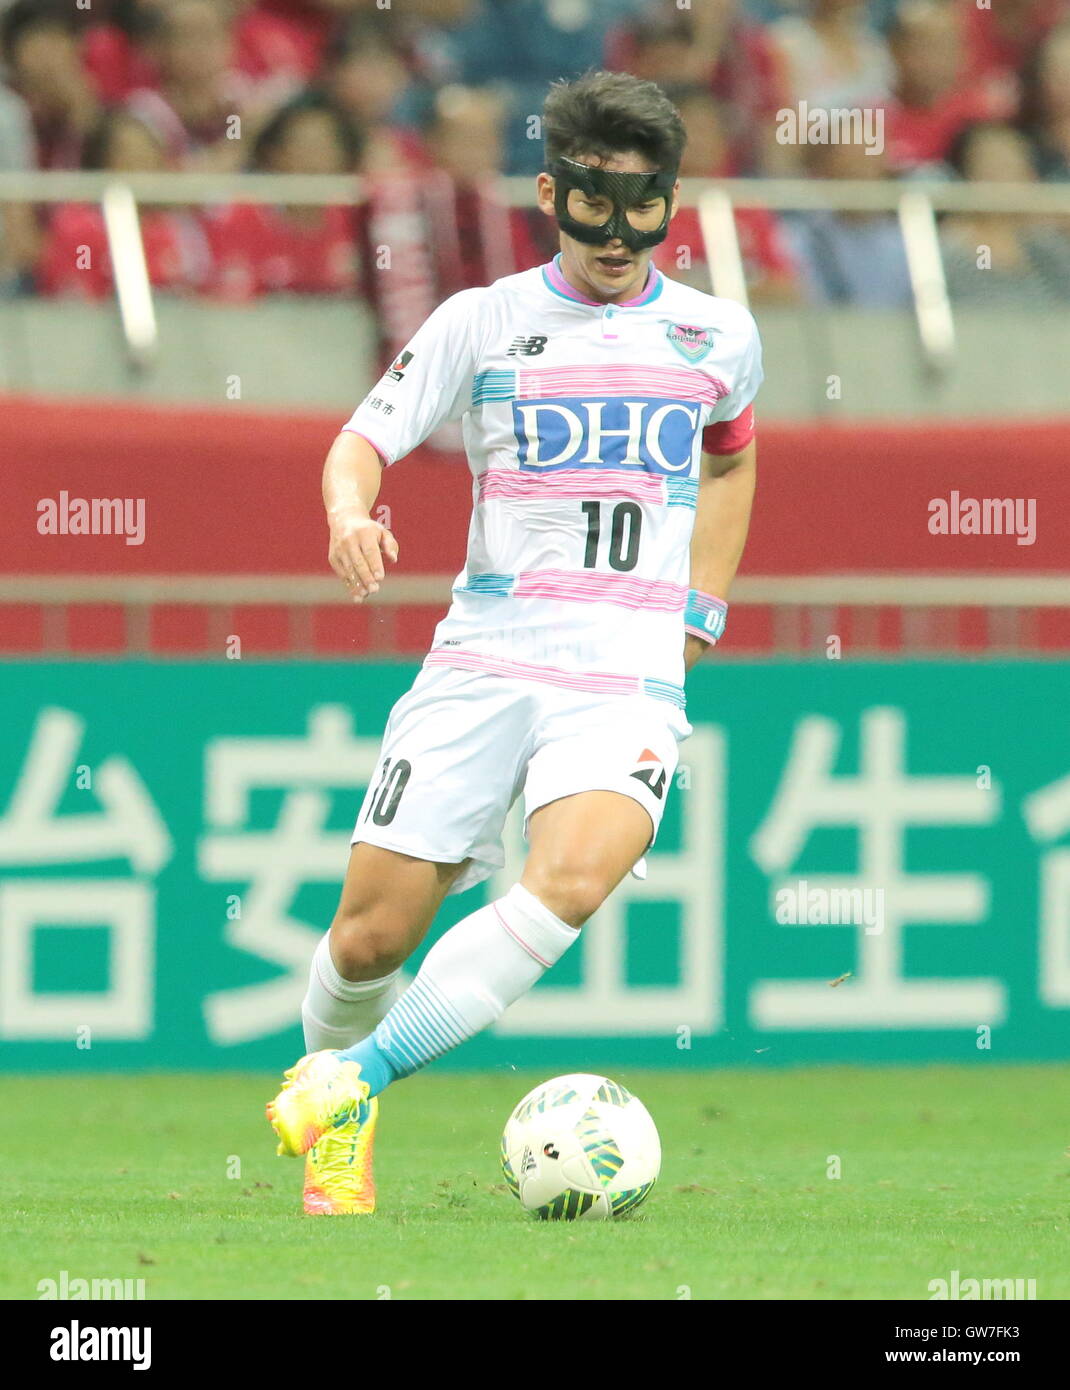 Sagan Tosu season preview: Who will be the next young star in Tosu